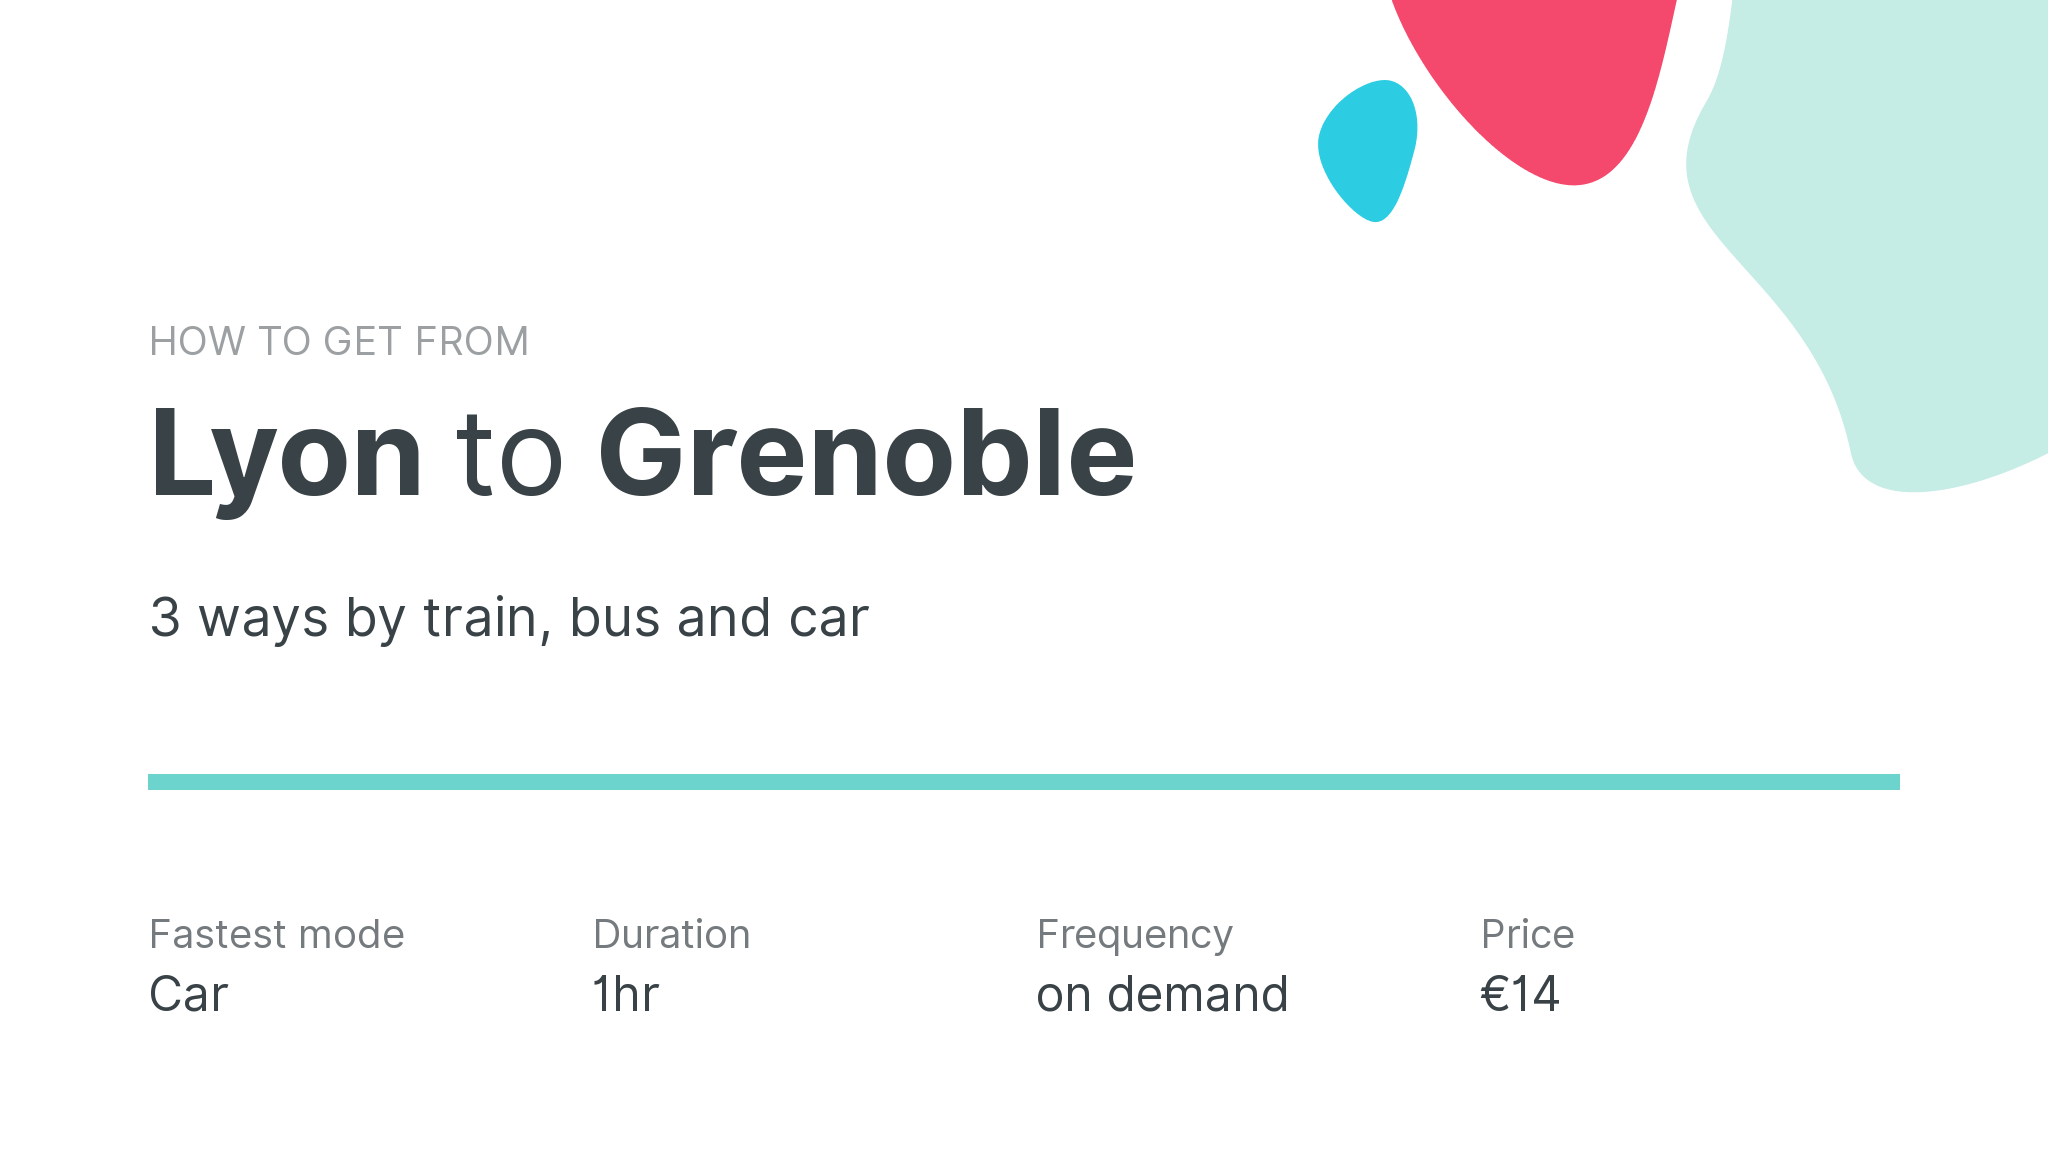 How do I get from Lyon to Grenoble